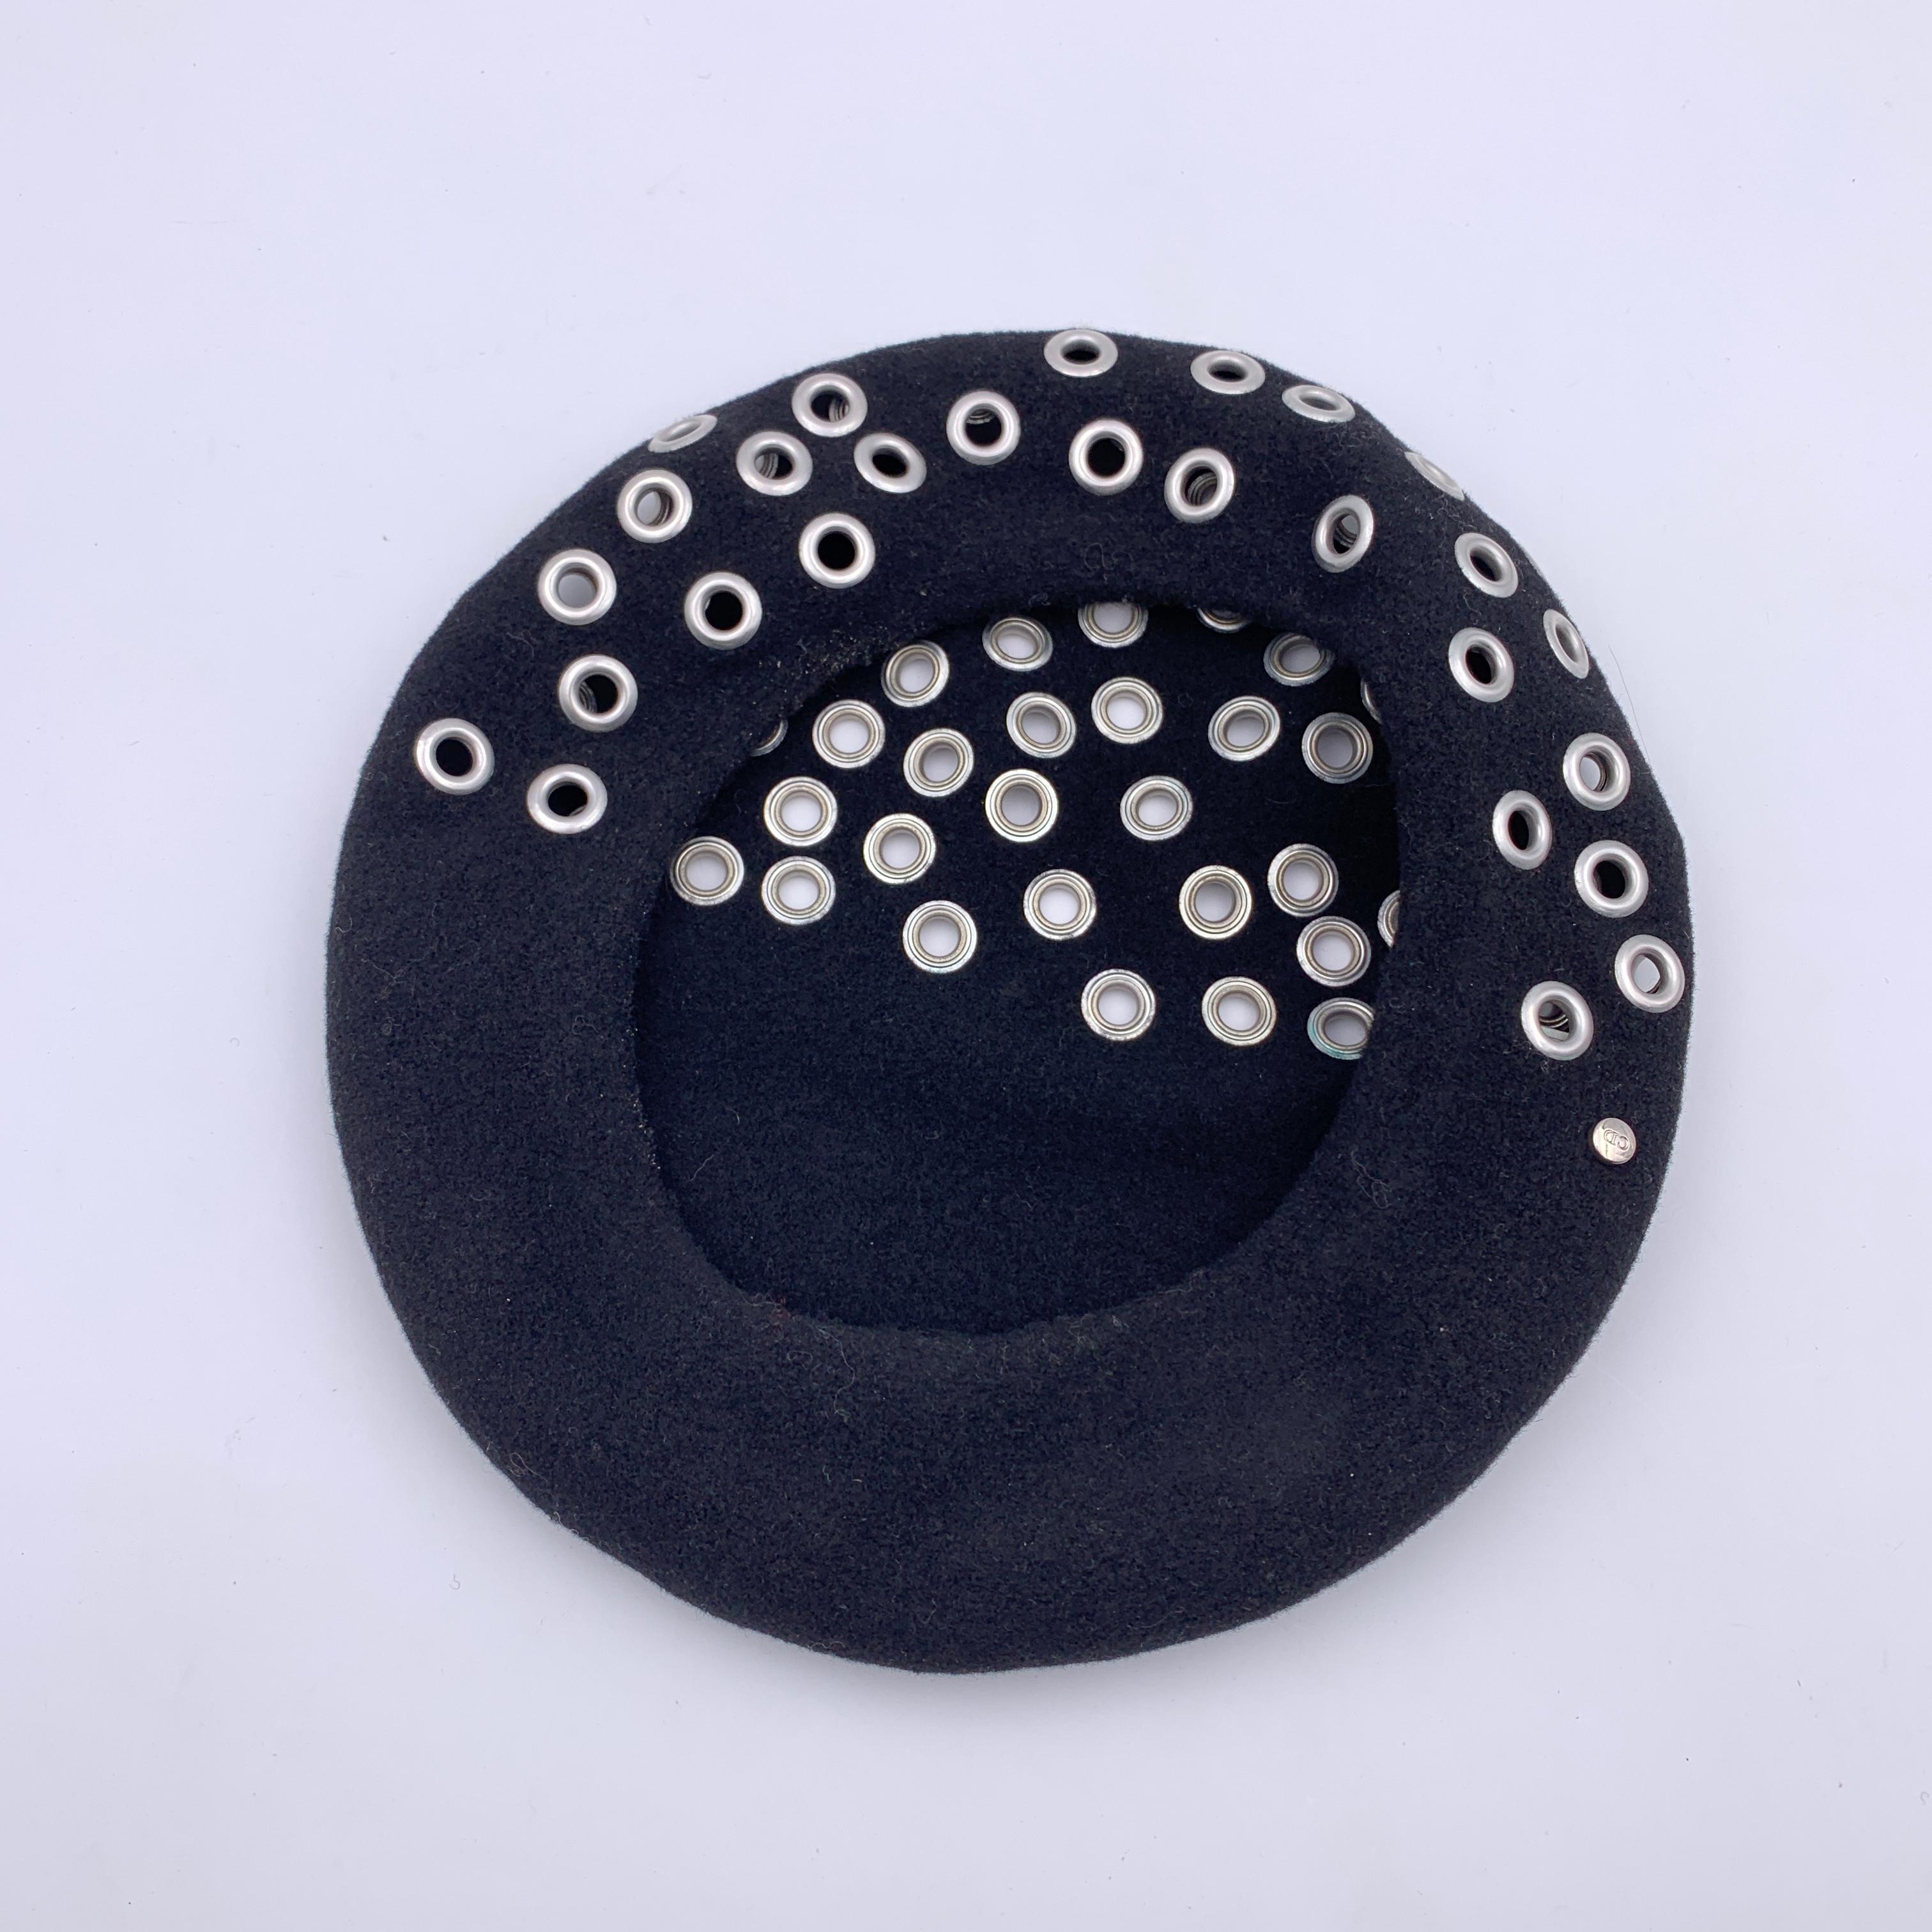 Christian Dior Black Wool Grommets Eyelets French Beret Hat In Excellent Condition For Sale In Rome, Rome